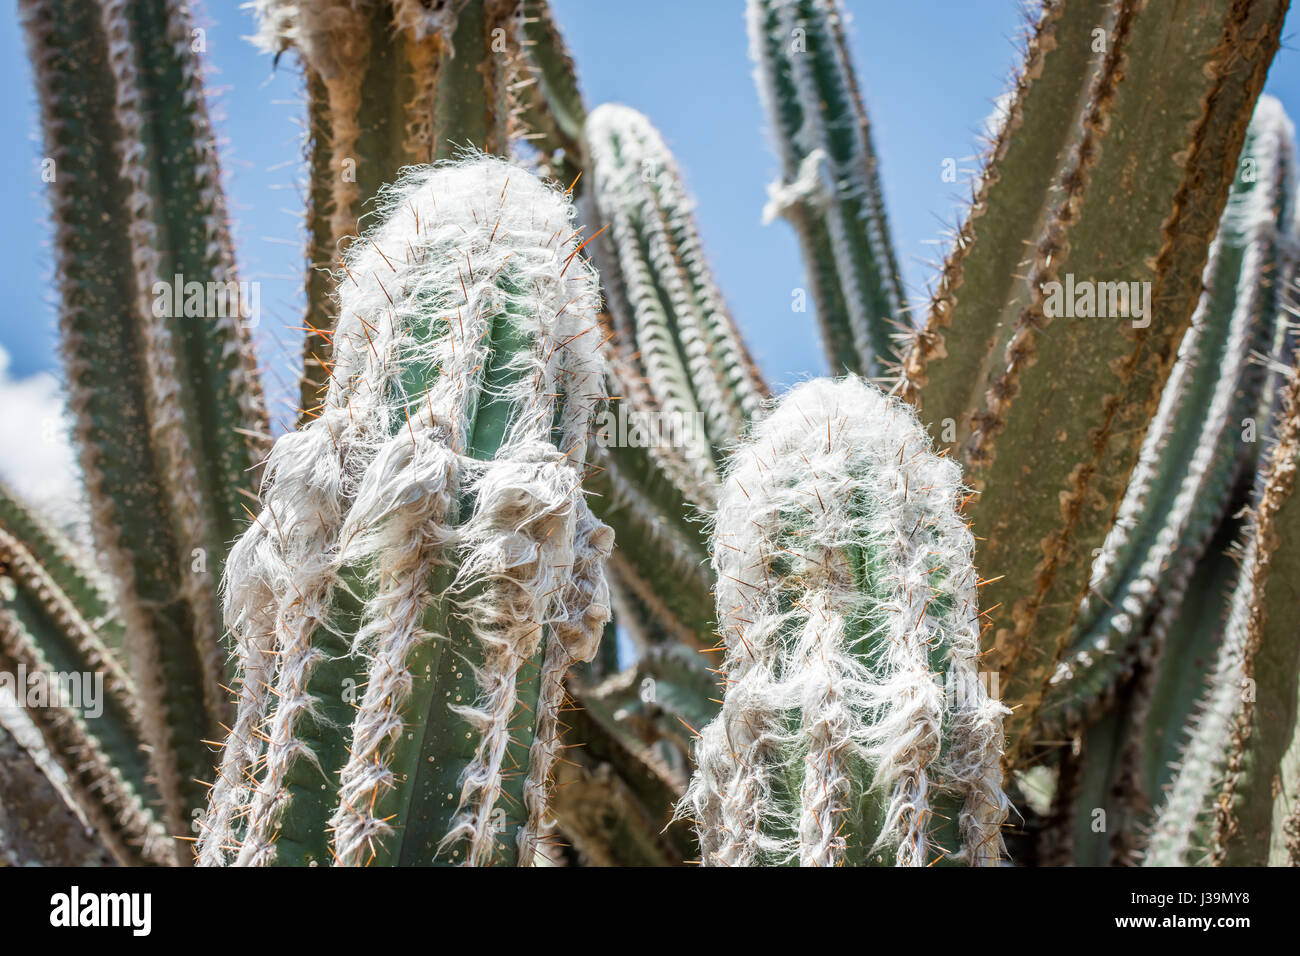 The white hair and orange spines of the woolly torch cactus (also known as the silver torch cactus), a perennial cactus native to South America. Stock Photo